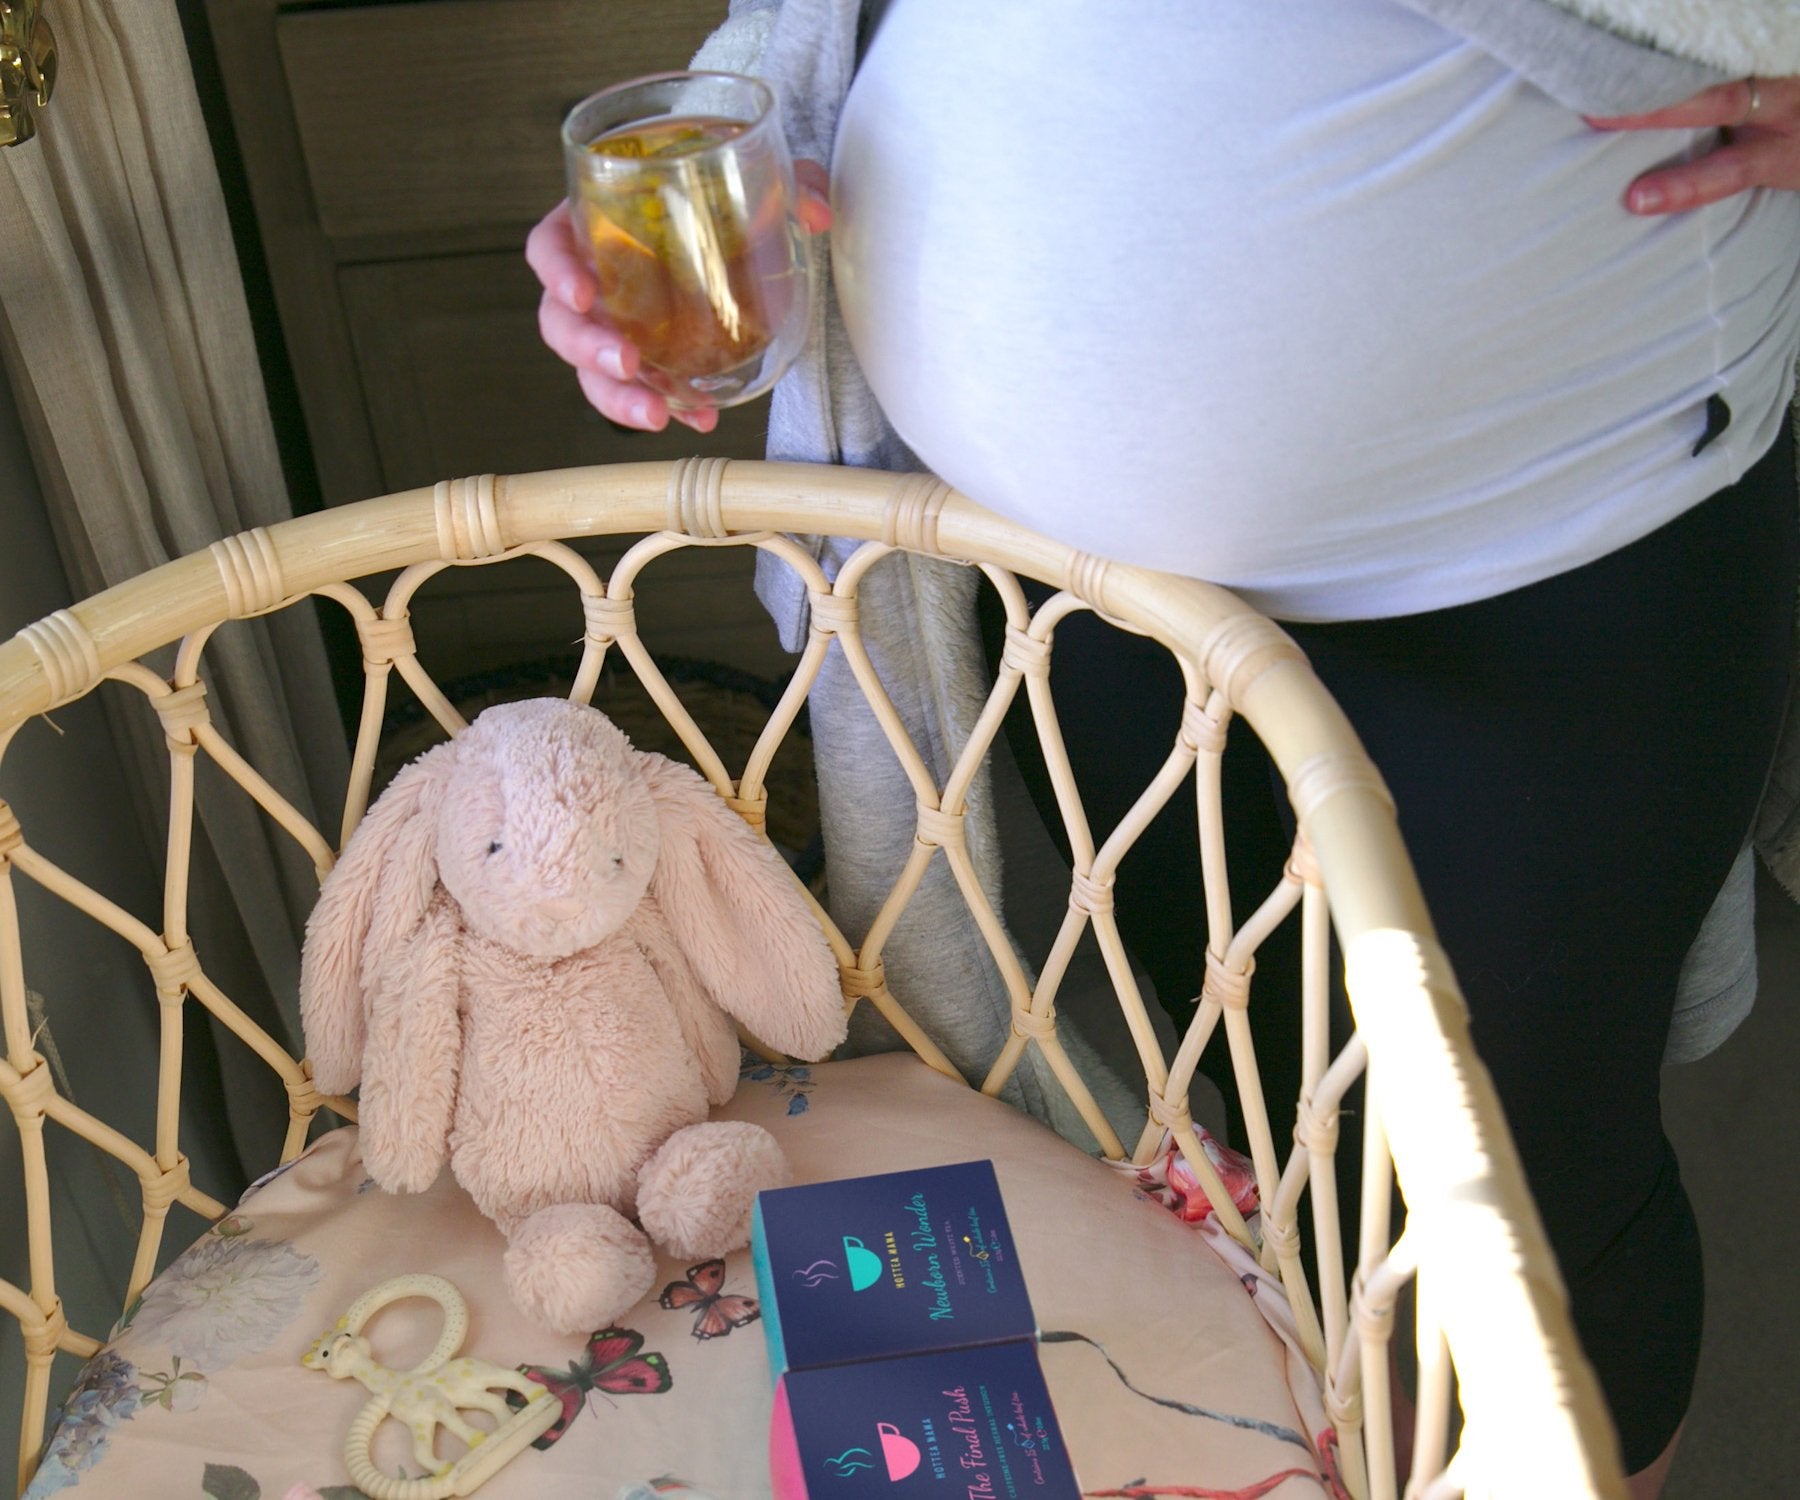 Pregnant lady stood by cot, holding a cup of tea and looking at cuddly toys and tea packs inside the crib